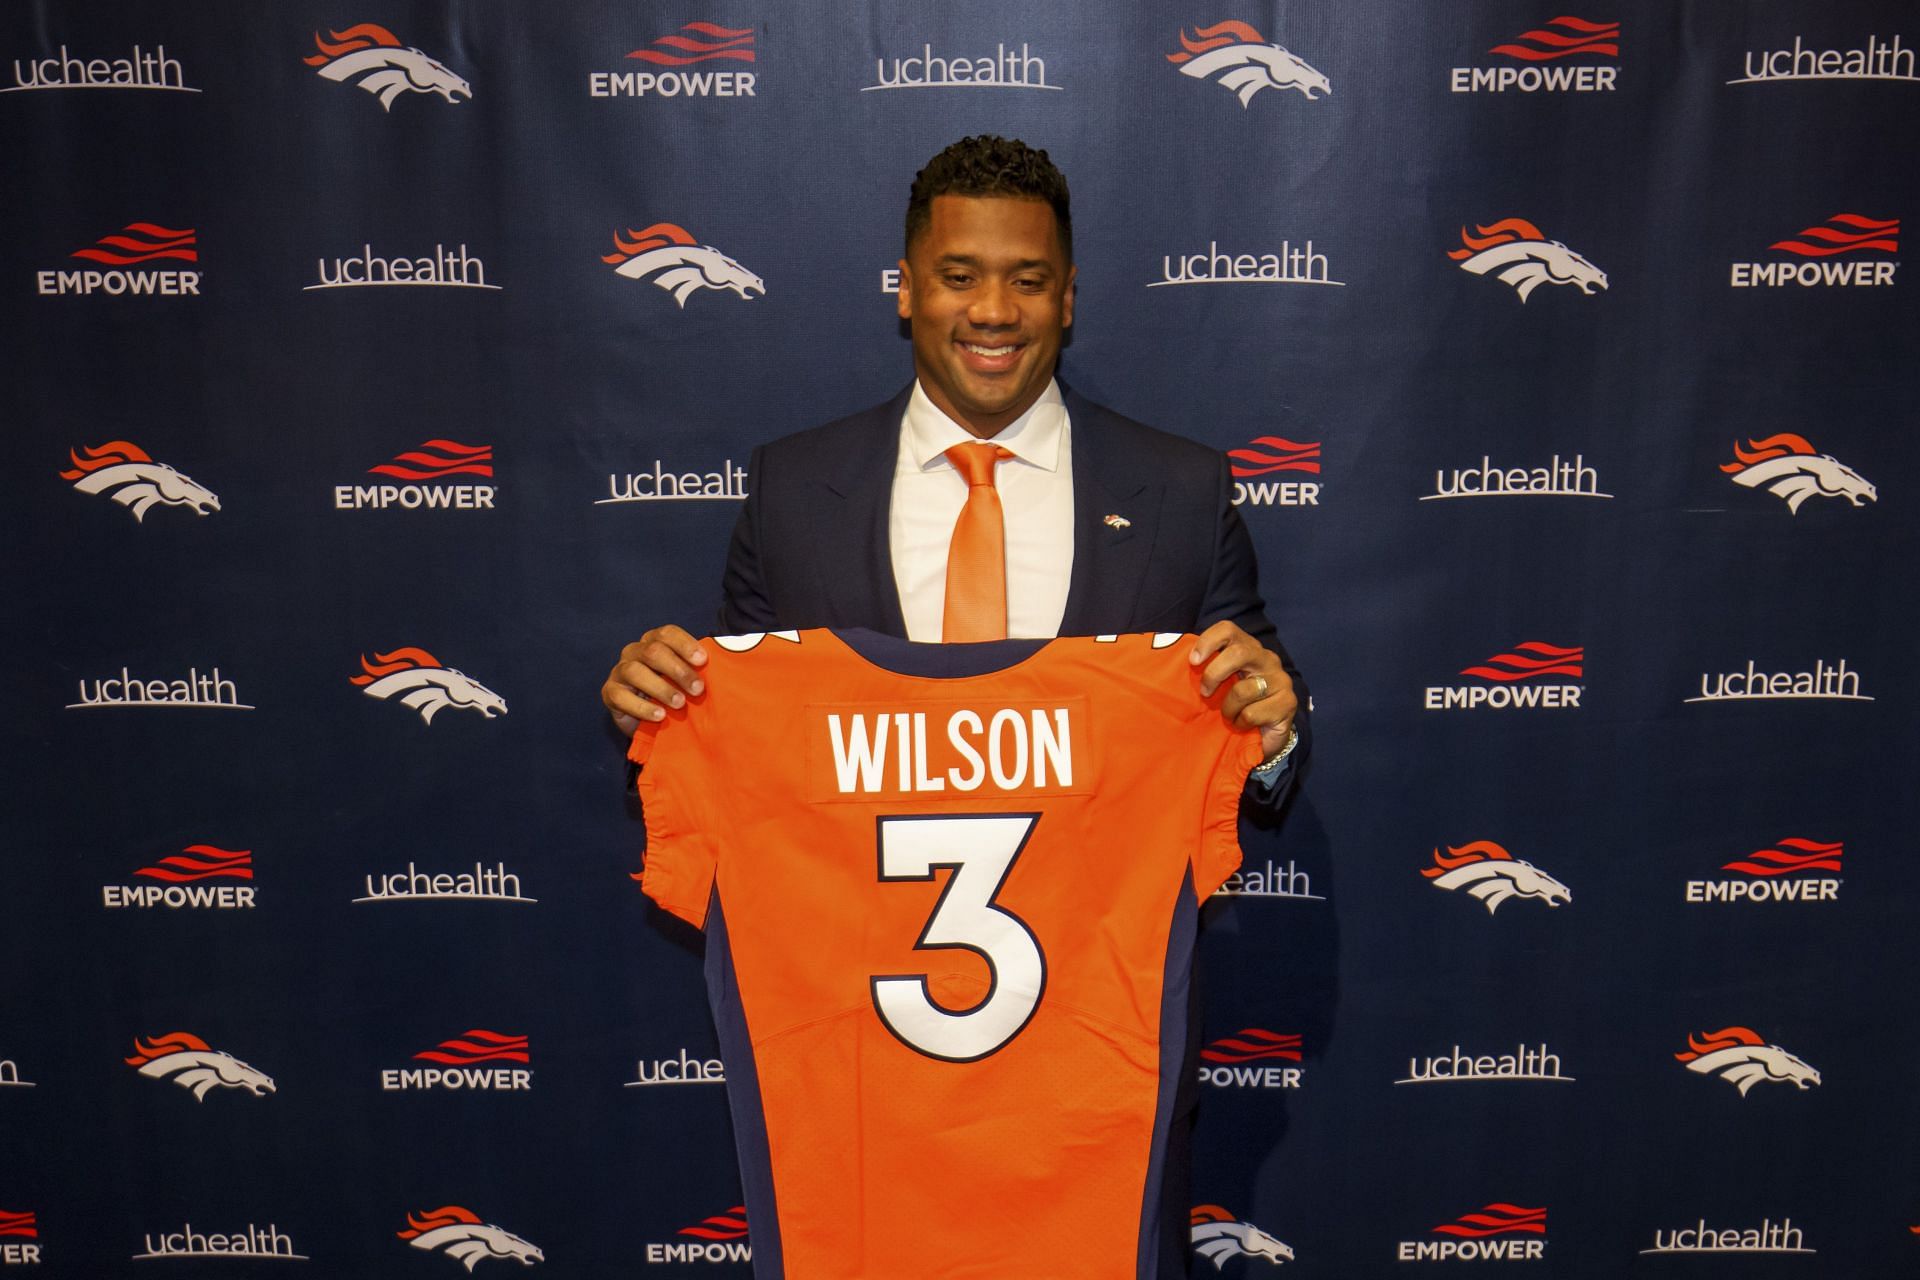 Russell Wilson has a golden opportunity in Denver